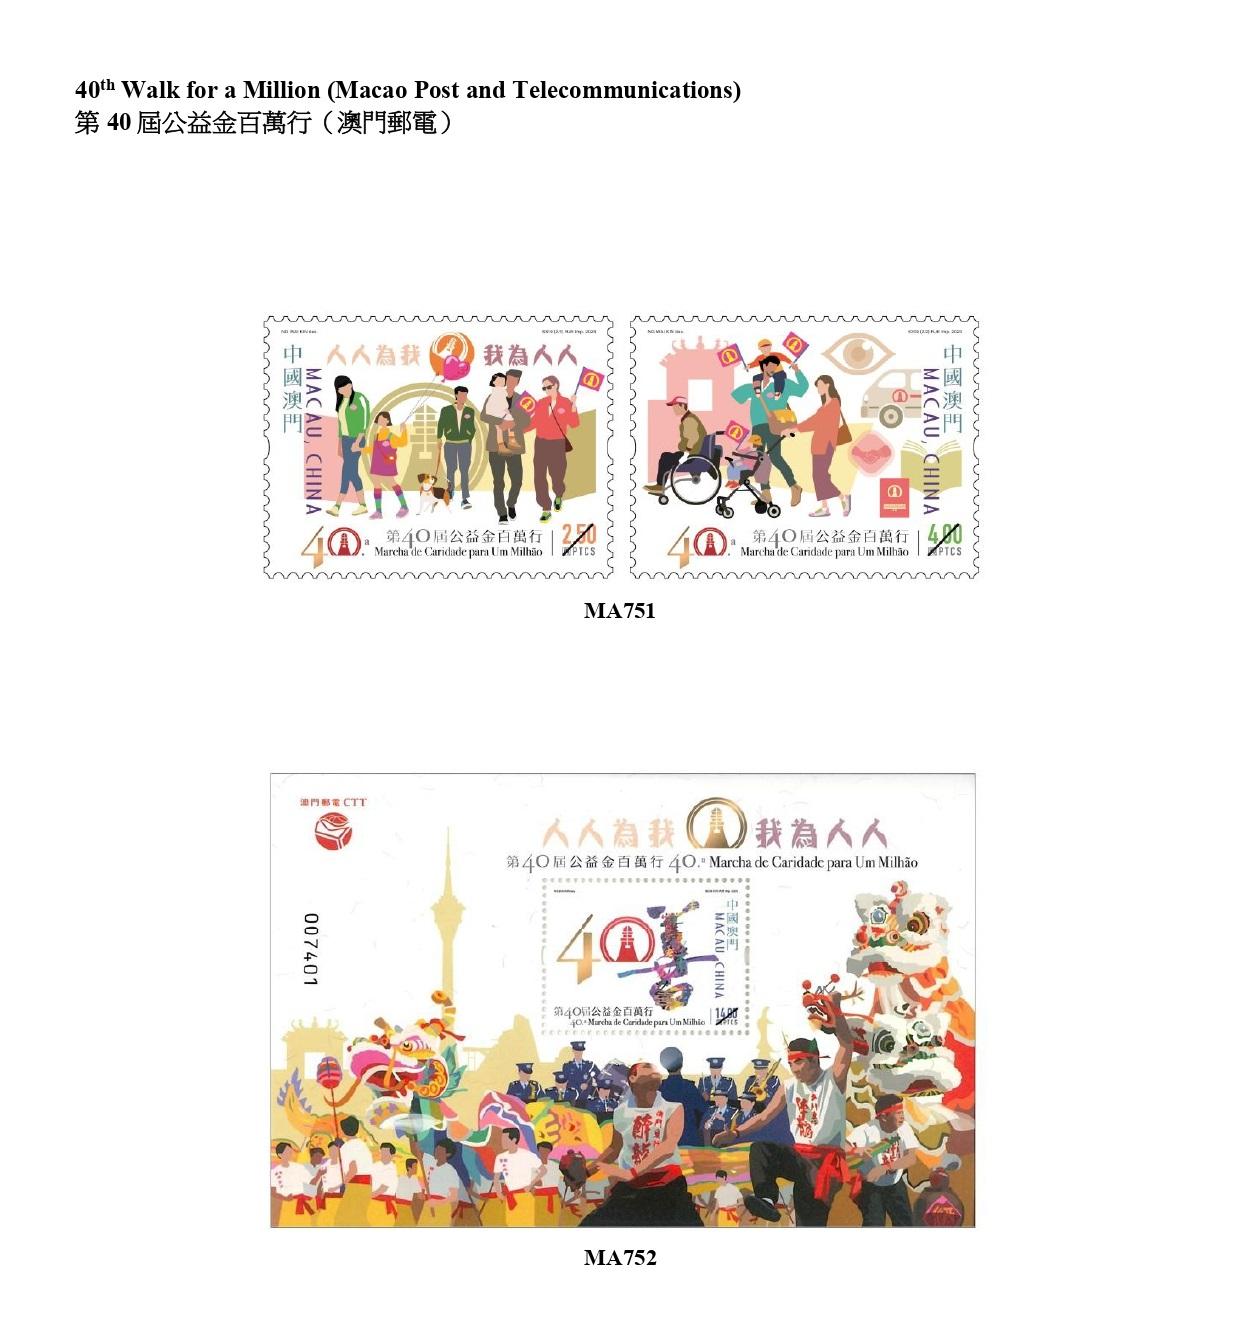 Hongkong Post announced today (January 29) that selected philatelic products issued by Macao Post and Telecommunications and the overseas postal administrations of Australia, Isle of Man, Liechtenstein and New Zealand will be available for sale from February 1 (Thursday). Picture shows philatelic products issued by Macao Post and Telecommunications.


